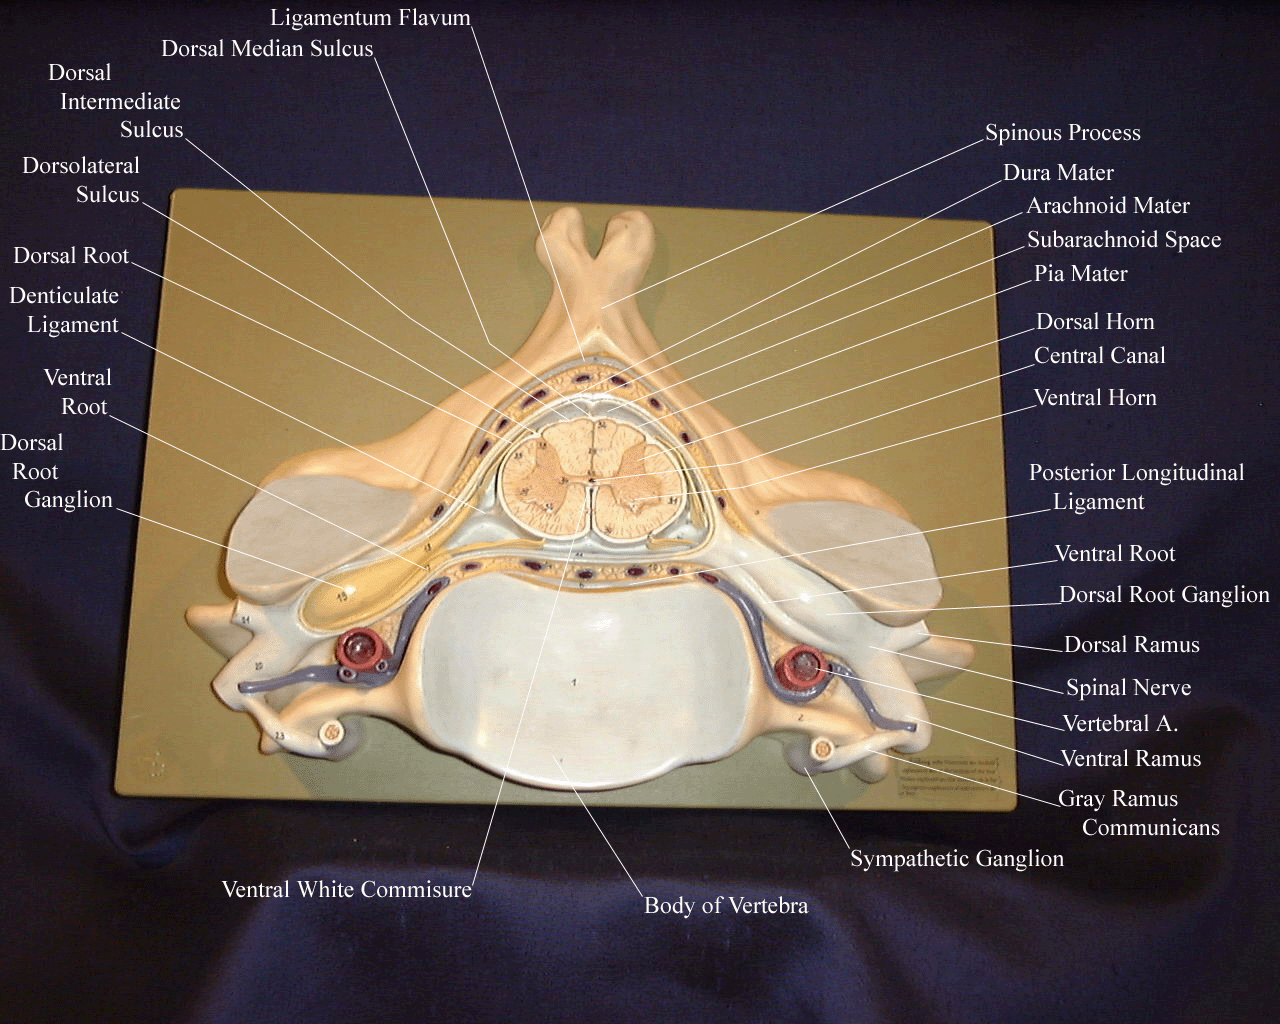 Spinal Cord Model